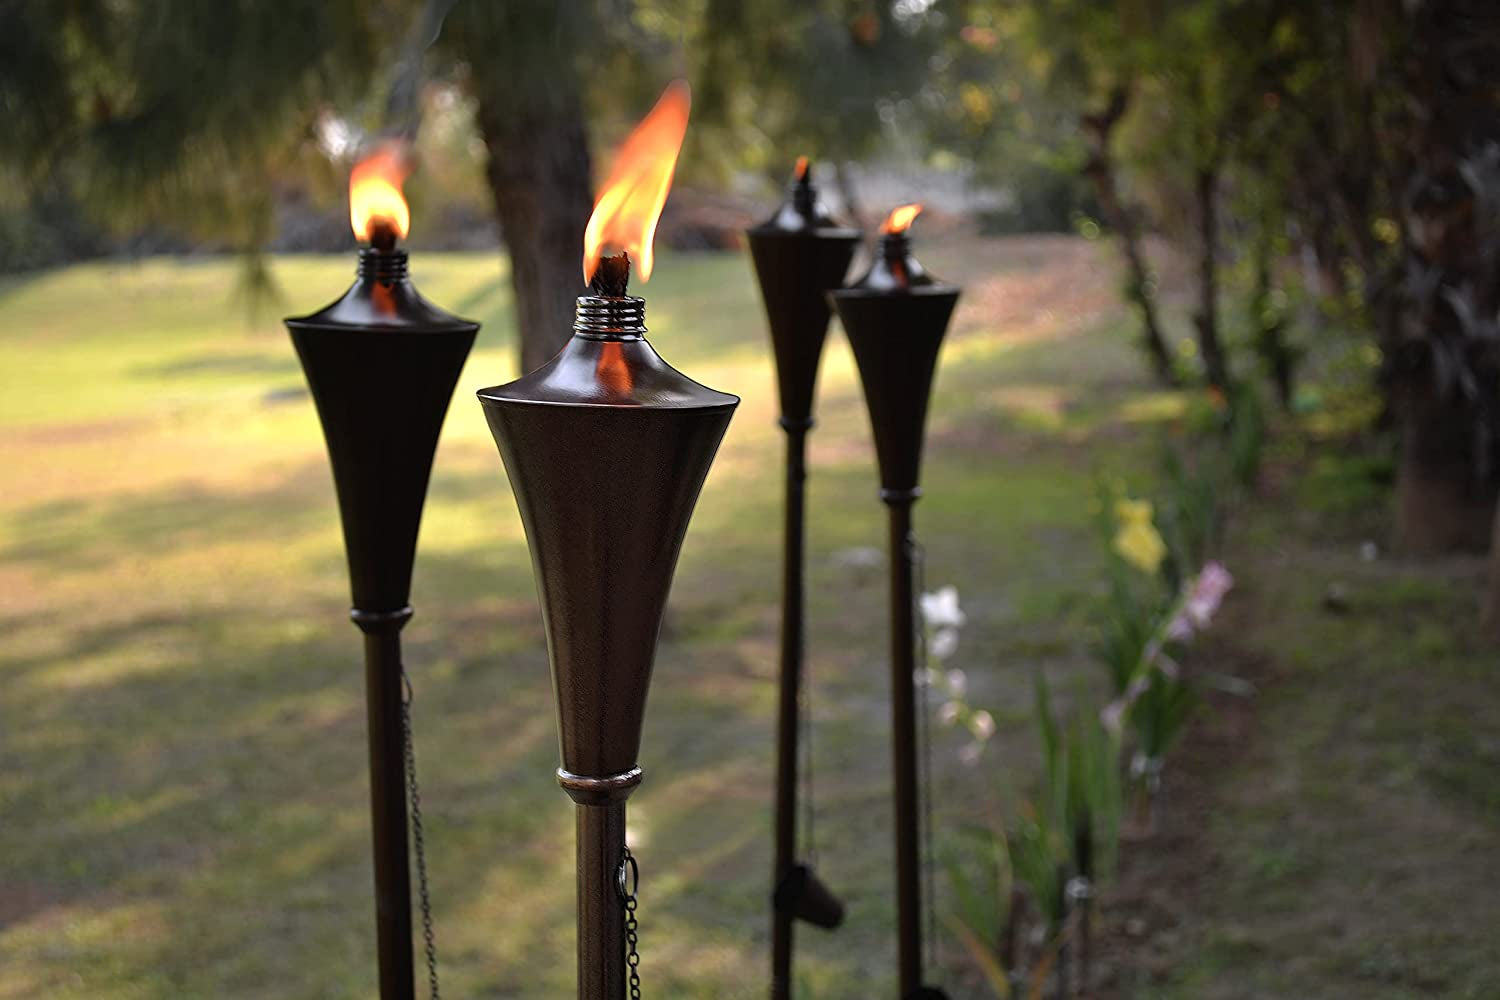 Deco Window, Large Flame Garden Torch - Deco Home Garden Torch Set of 2 | Citronella Garden Outdoor/Patio Outdoor Lighting Torch for Party Patio Pathway with Spikes and Deck Clamp | Caramel Black